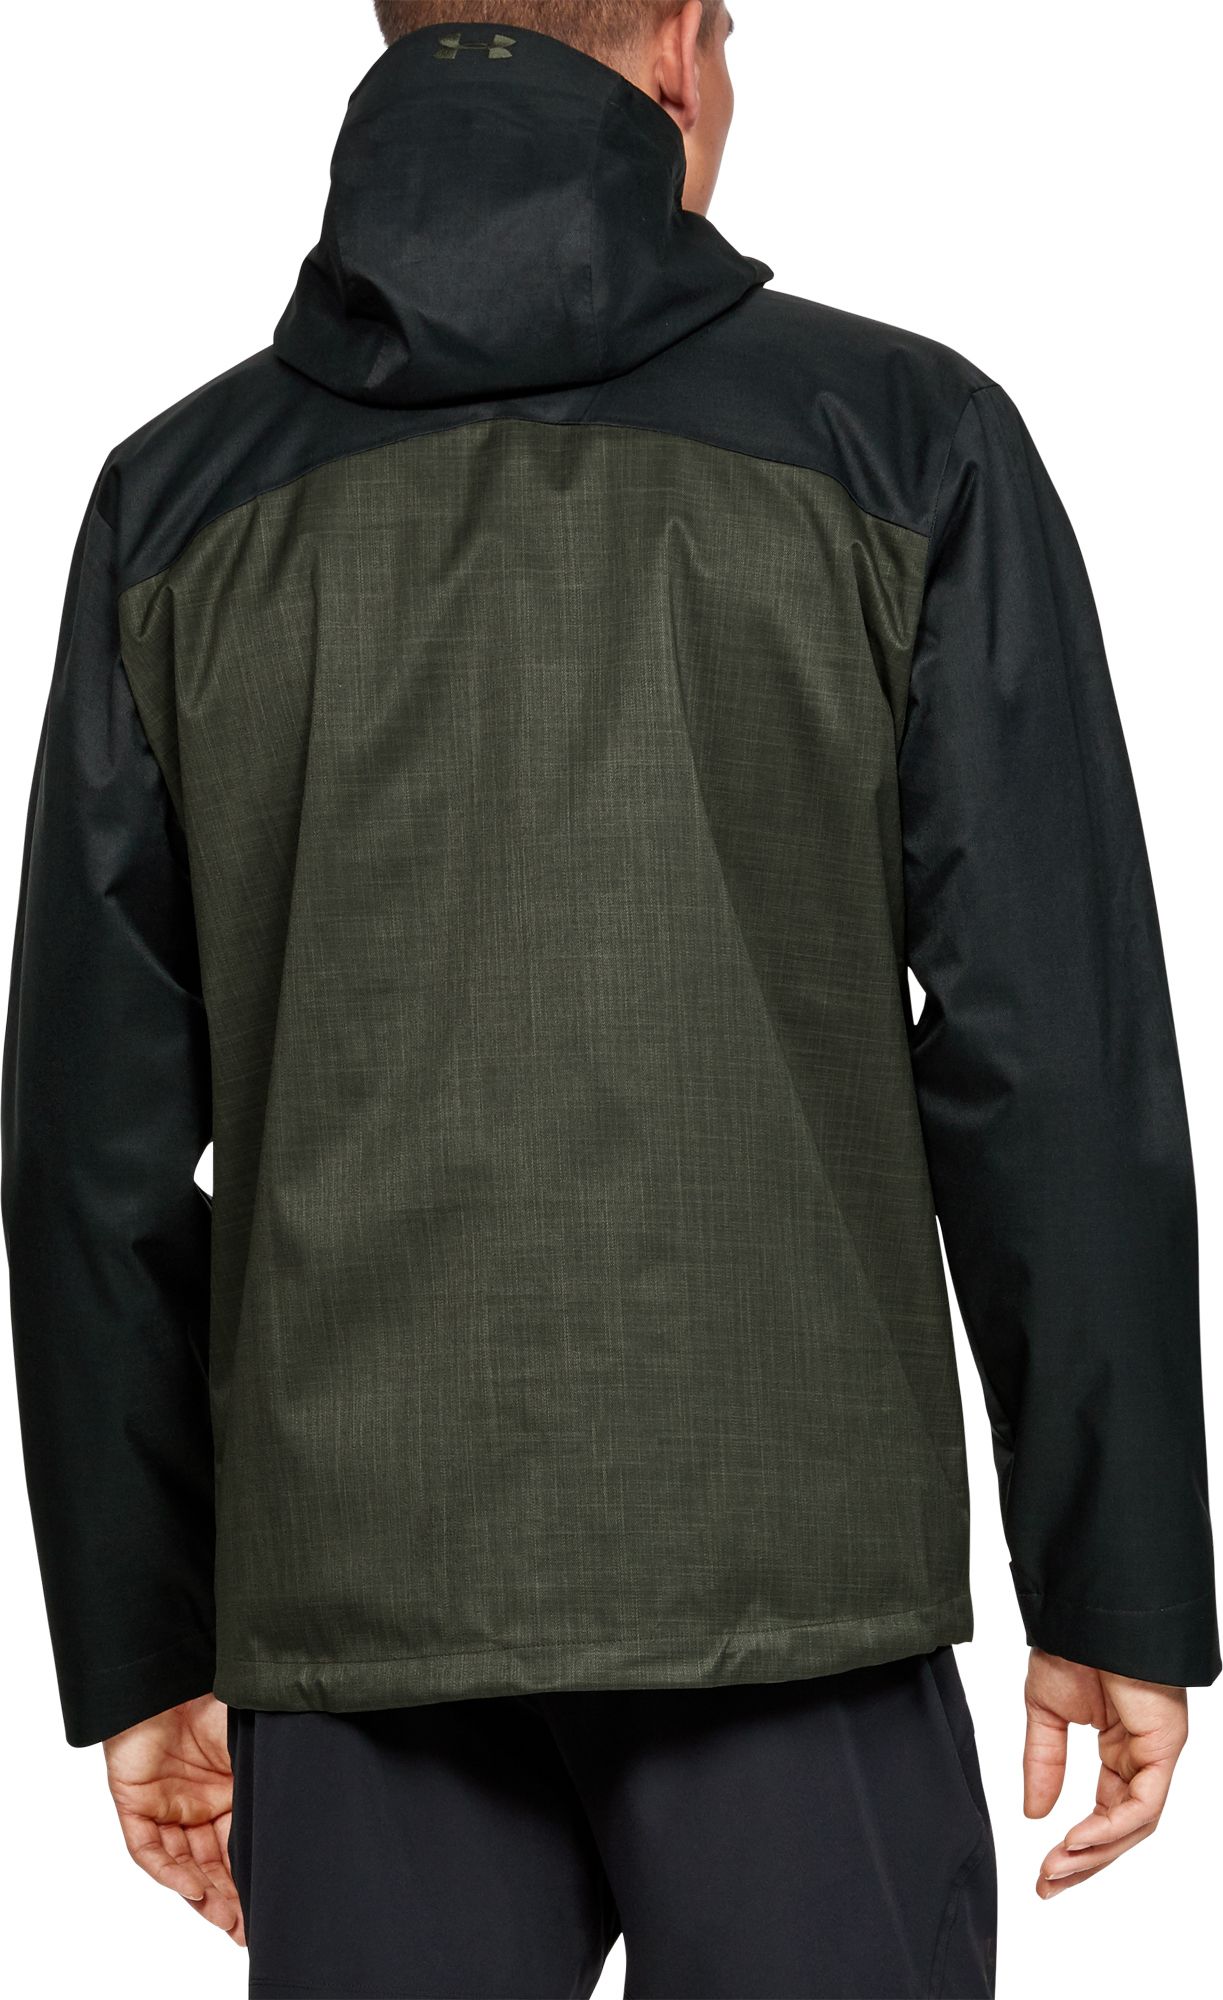 under armour 3 in 1 mens jacket